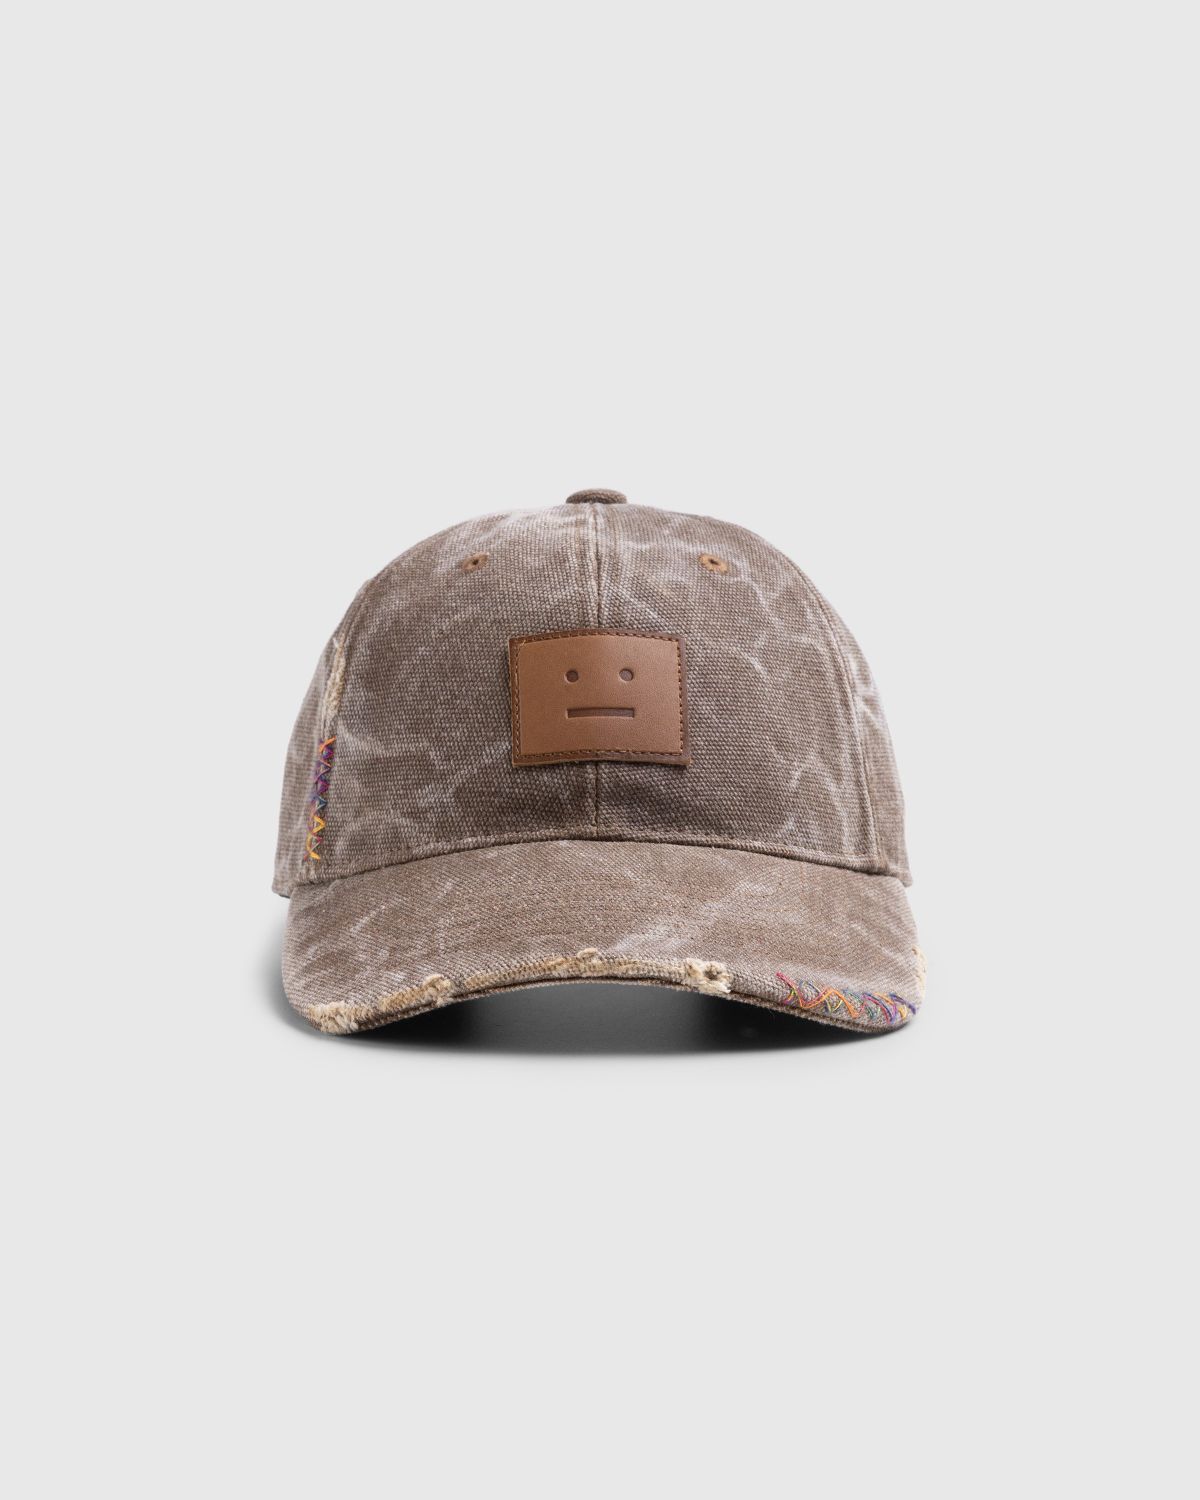 Acne Studios – Face Toffee Patch | Leather Shop Highsnobiety Cap Brown